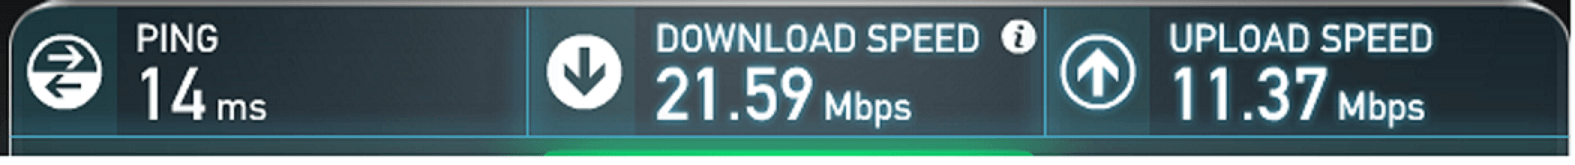 faster internet speed cropped 2.png